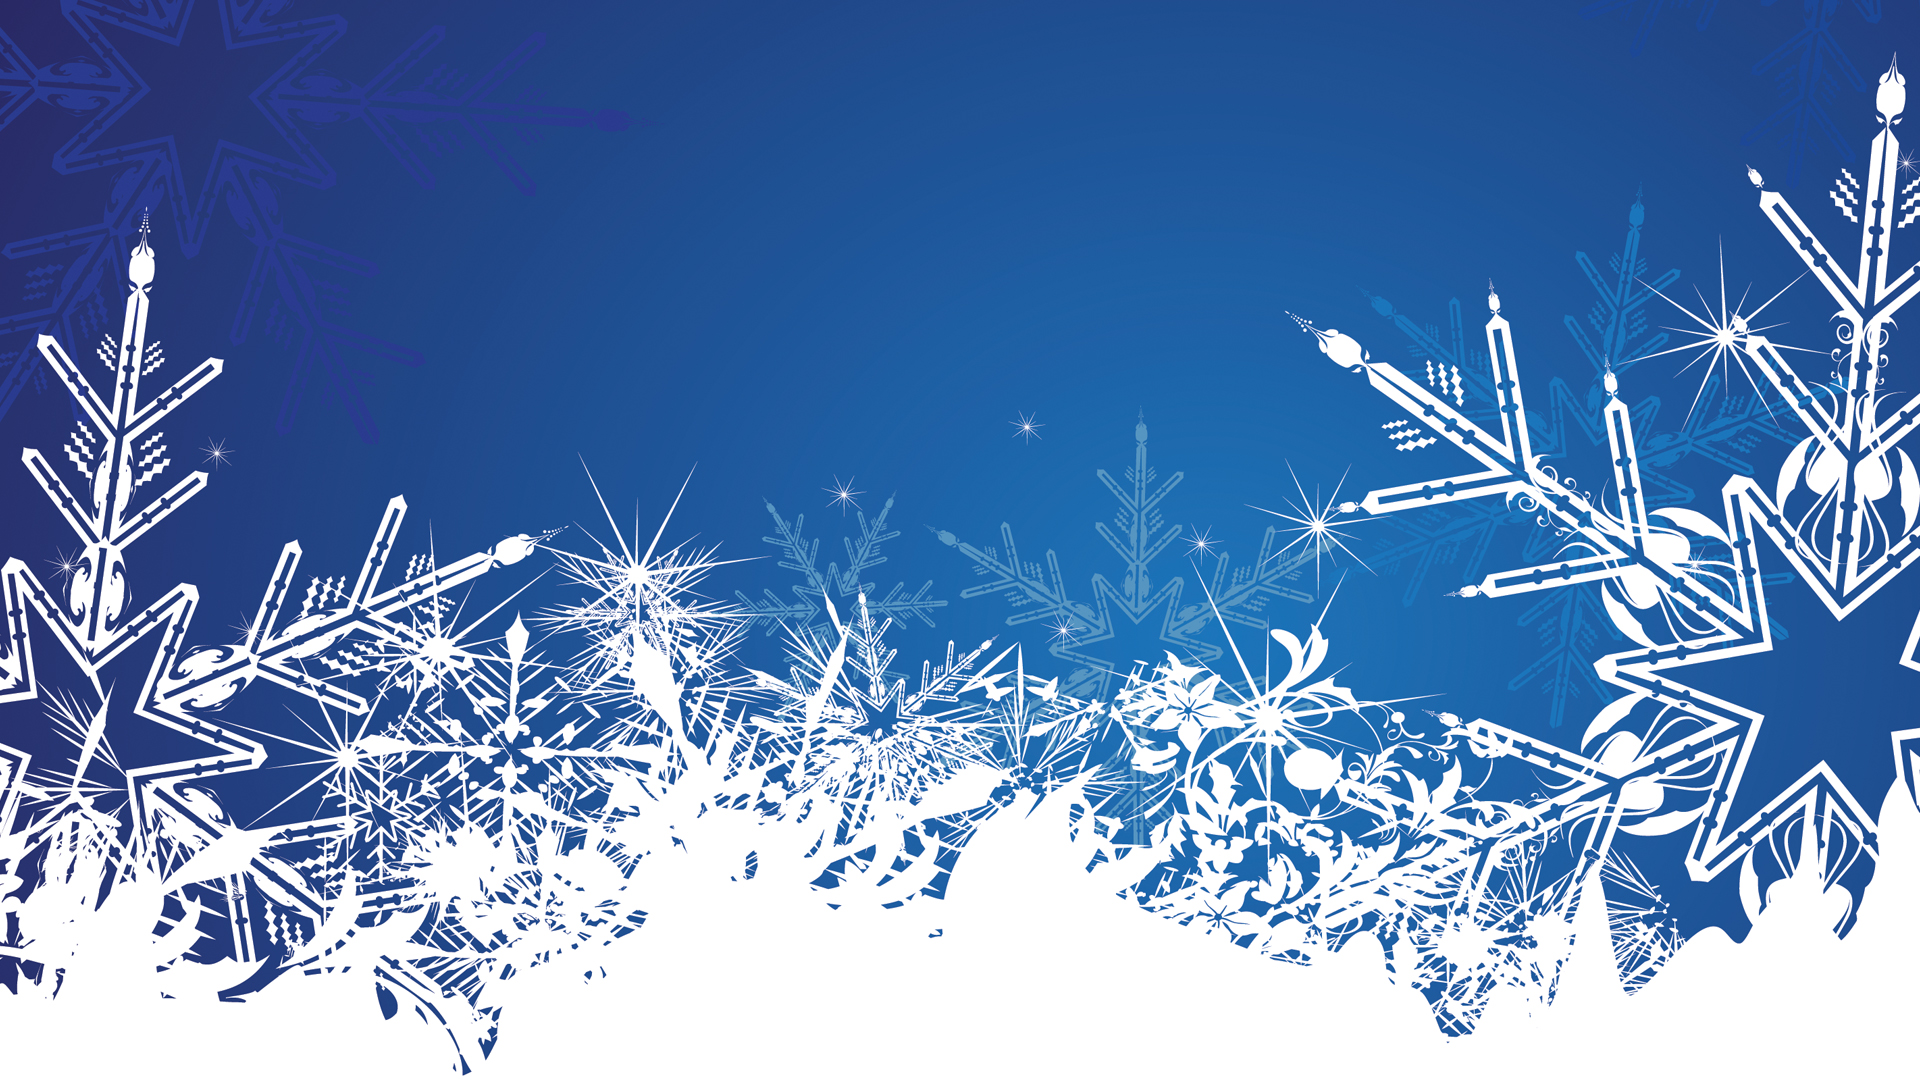 General 1920x1080 abstract winter snowflakes vector art blue